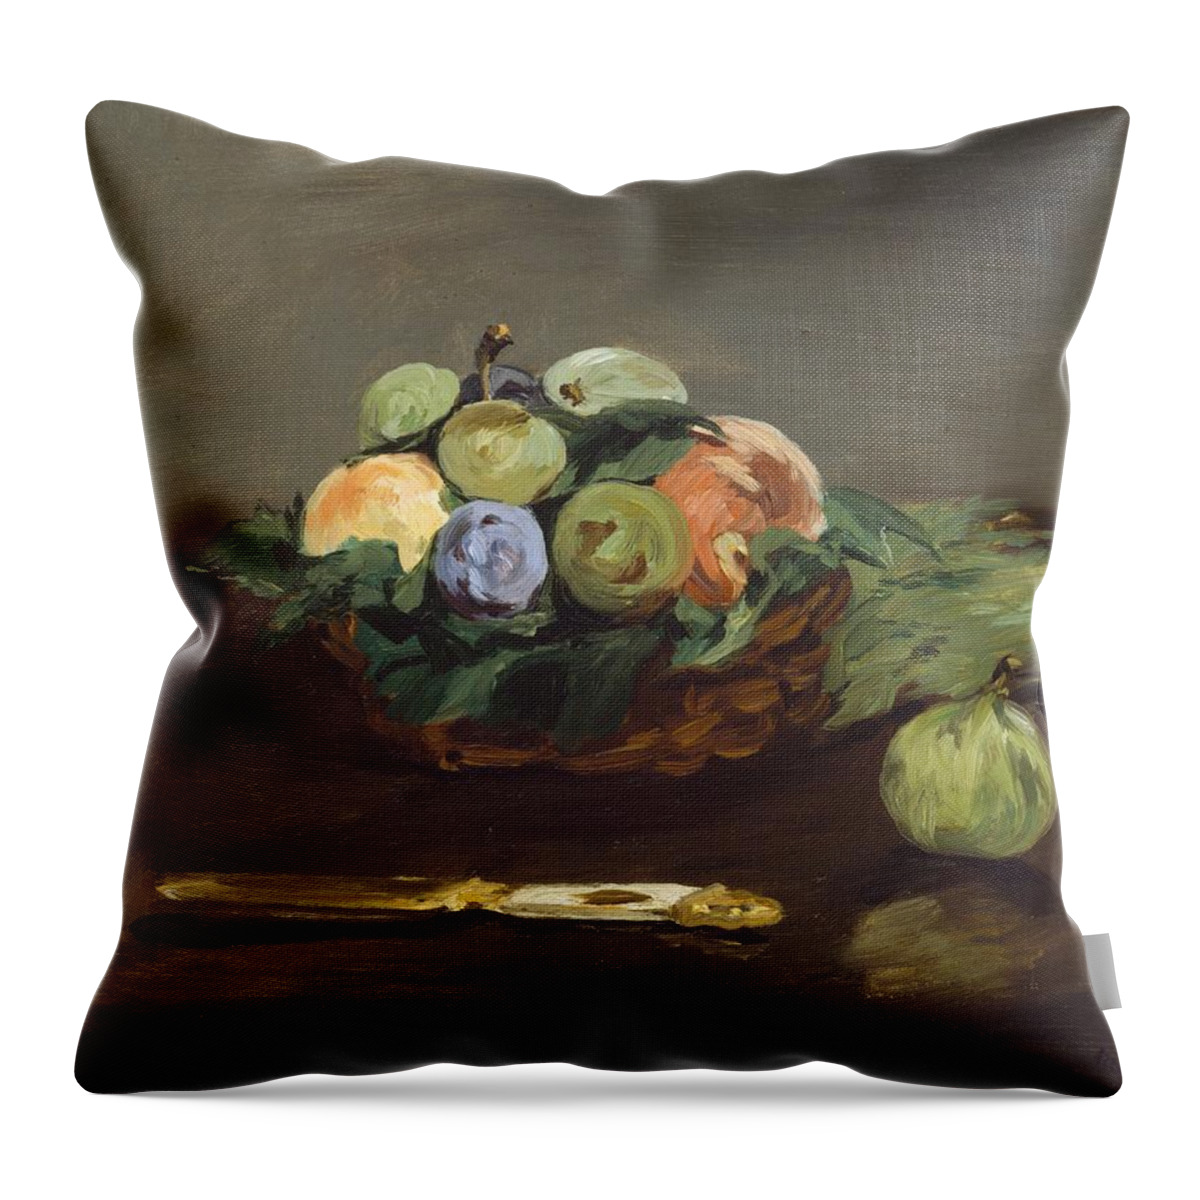 1864 Throw Pillow featuring the painting Basket of Fruit by Edouard Manet